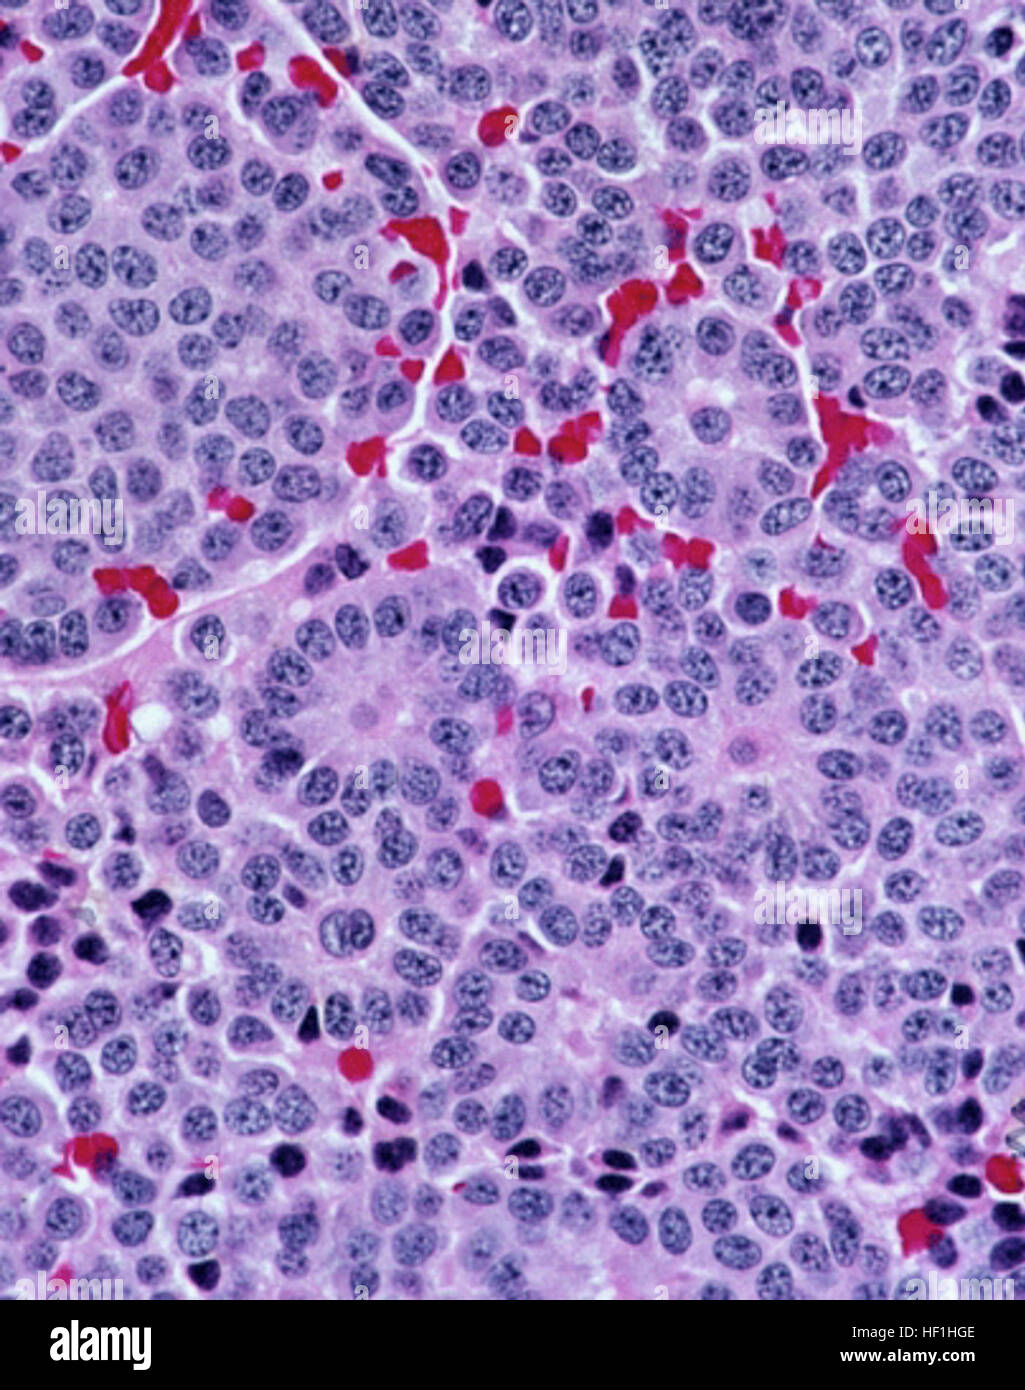 Typical carcinoid tumor of the lung, prominent rosettes Stock Photo